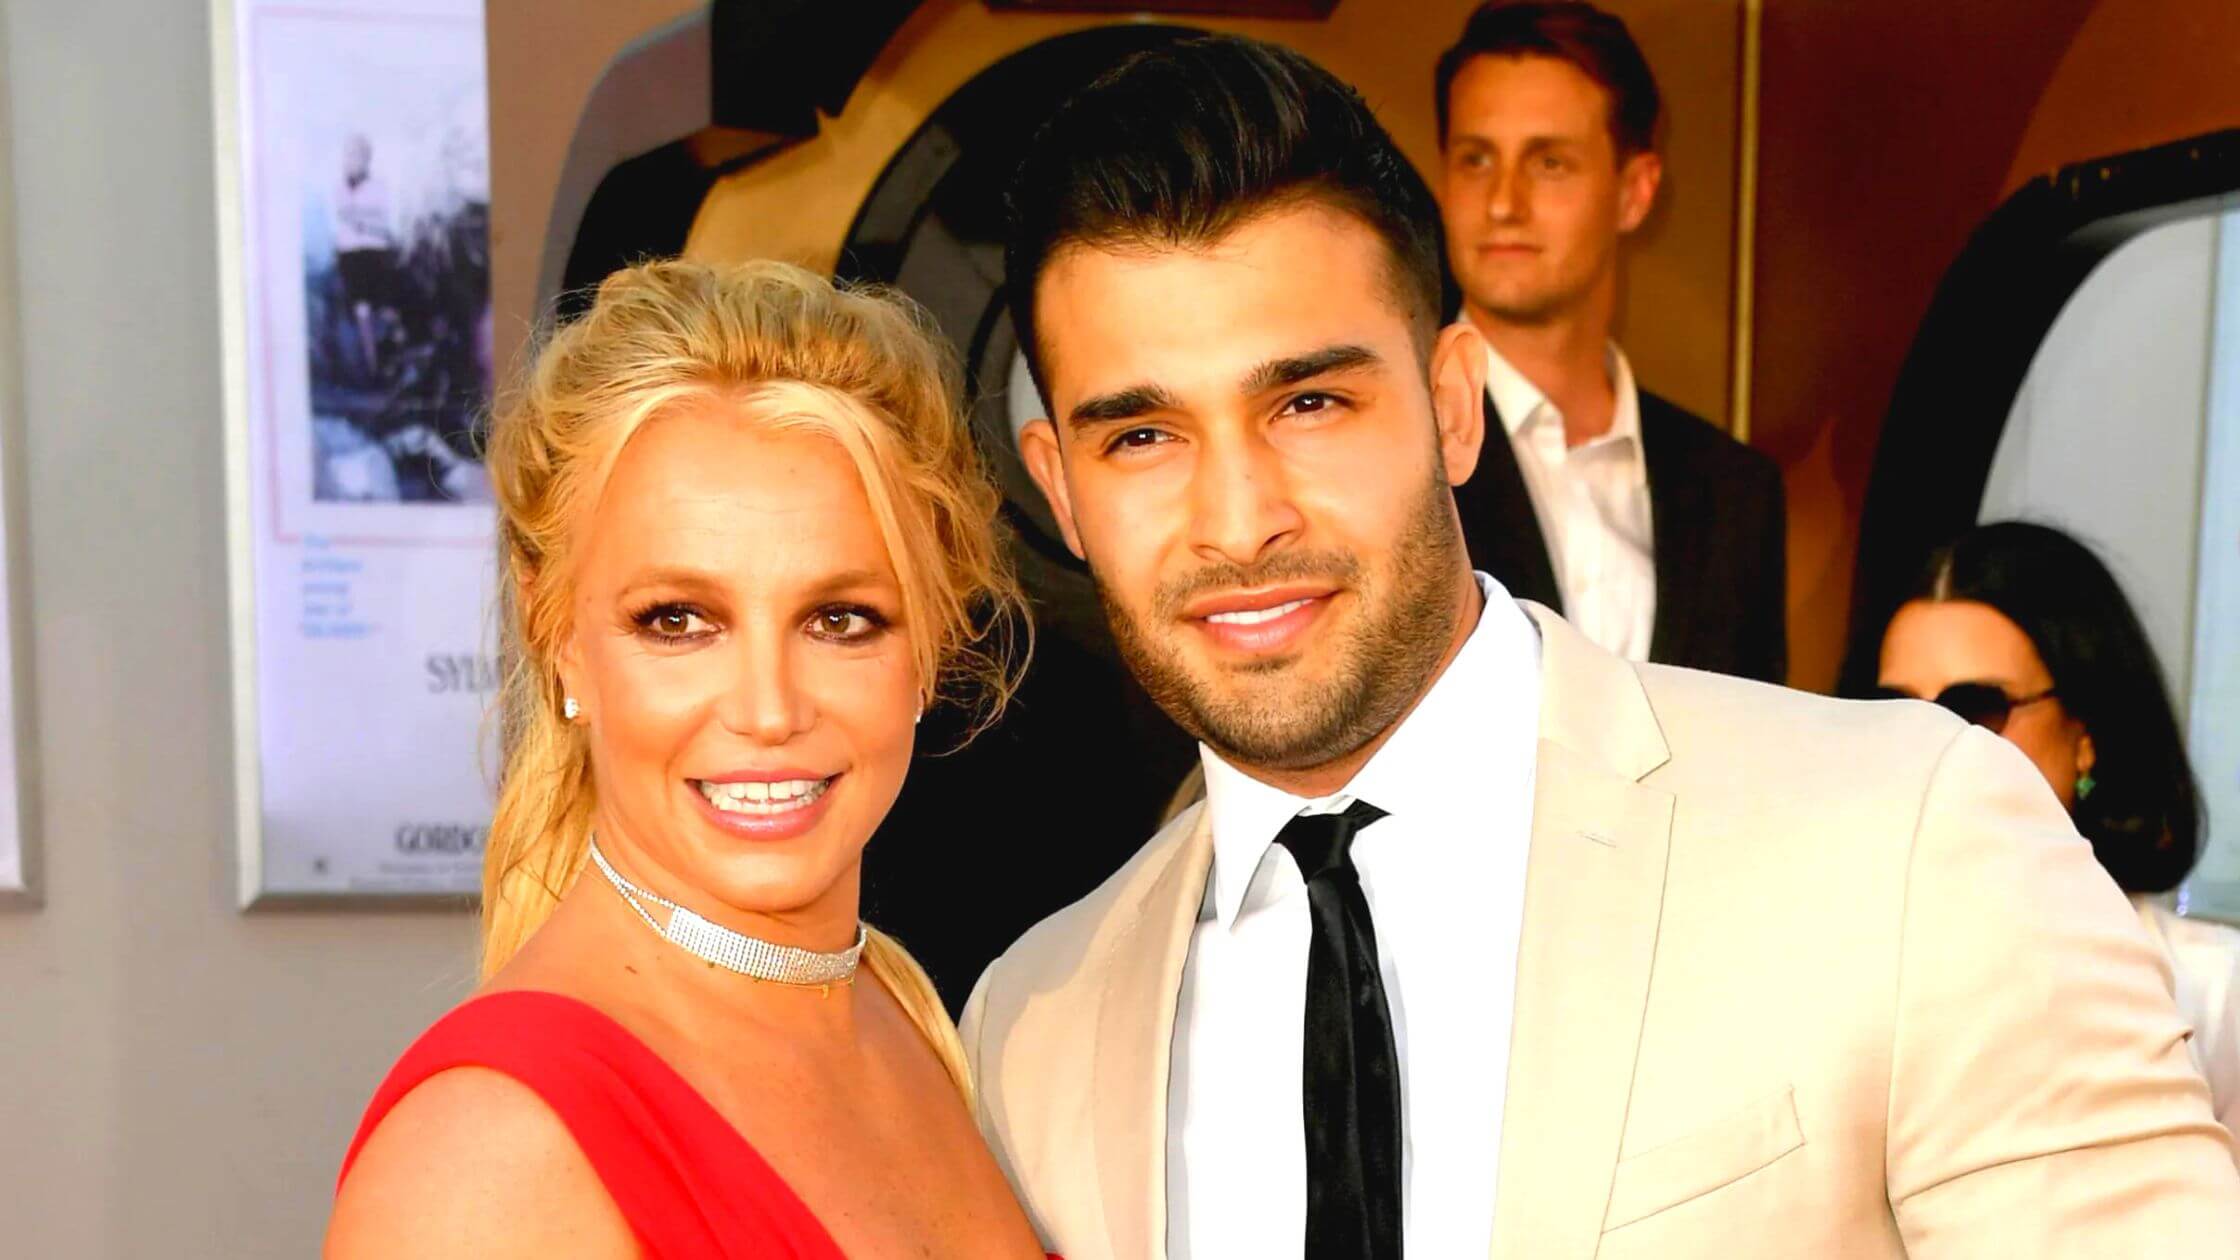 "He Wasn't Invited", Britney Spears Confirms About Brother Bryan